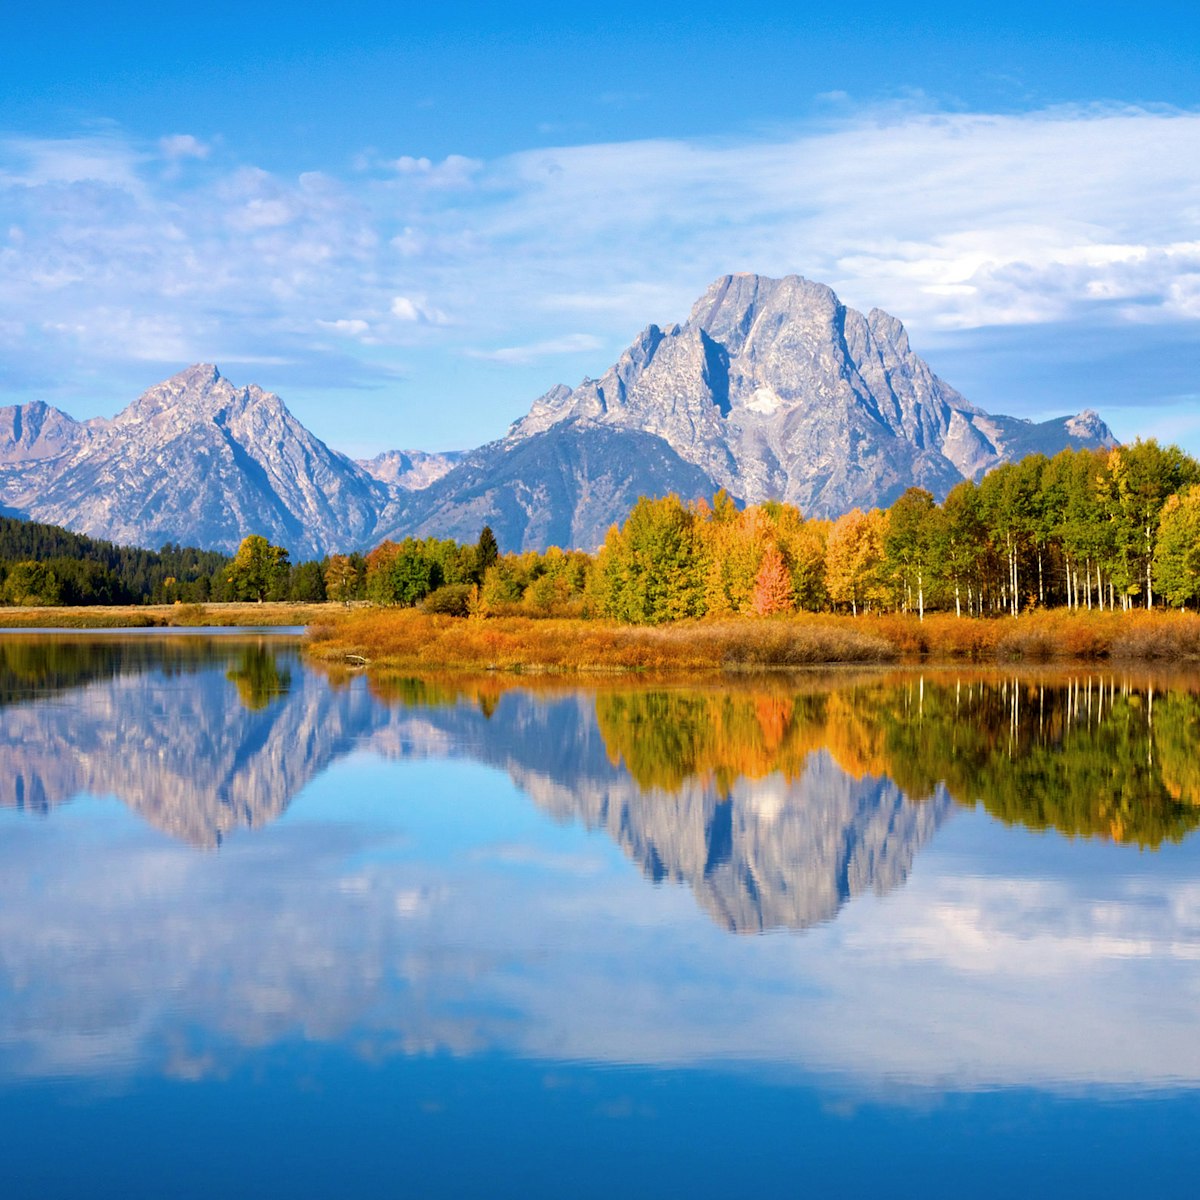 View of the Grand Teton Mountains from Oxbow Bend on the Snake River. Grand Teton National Park, Wyoming, United States.